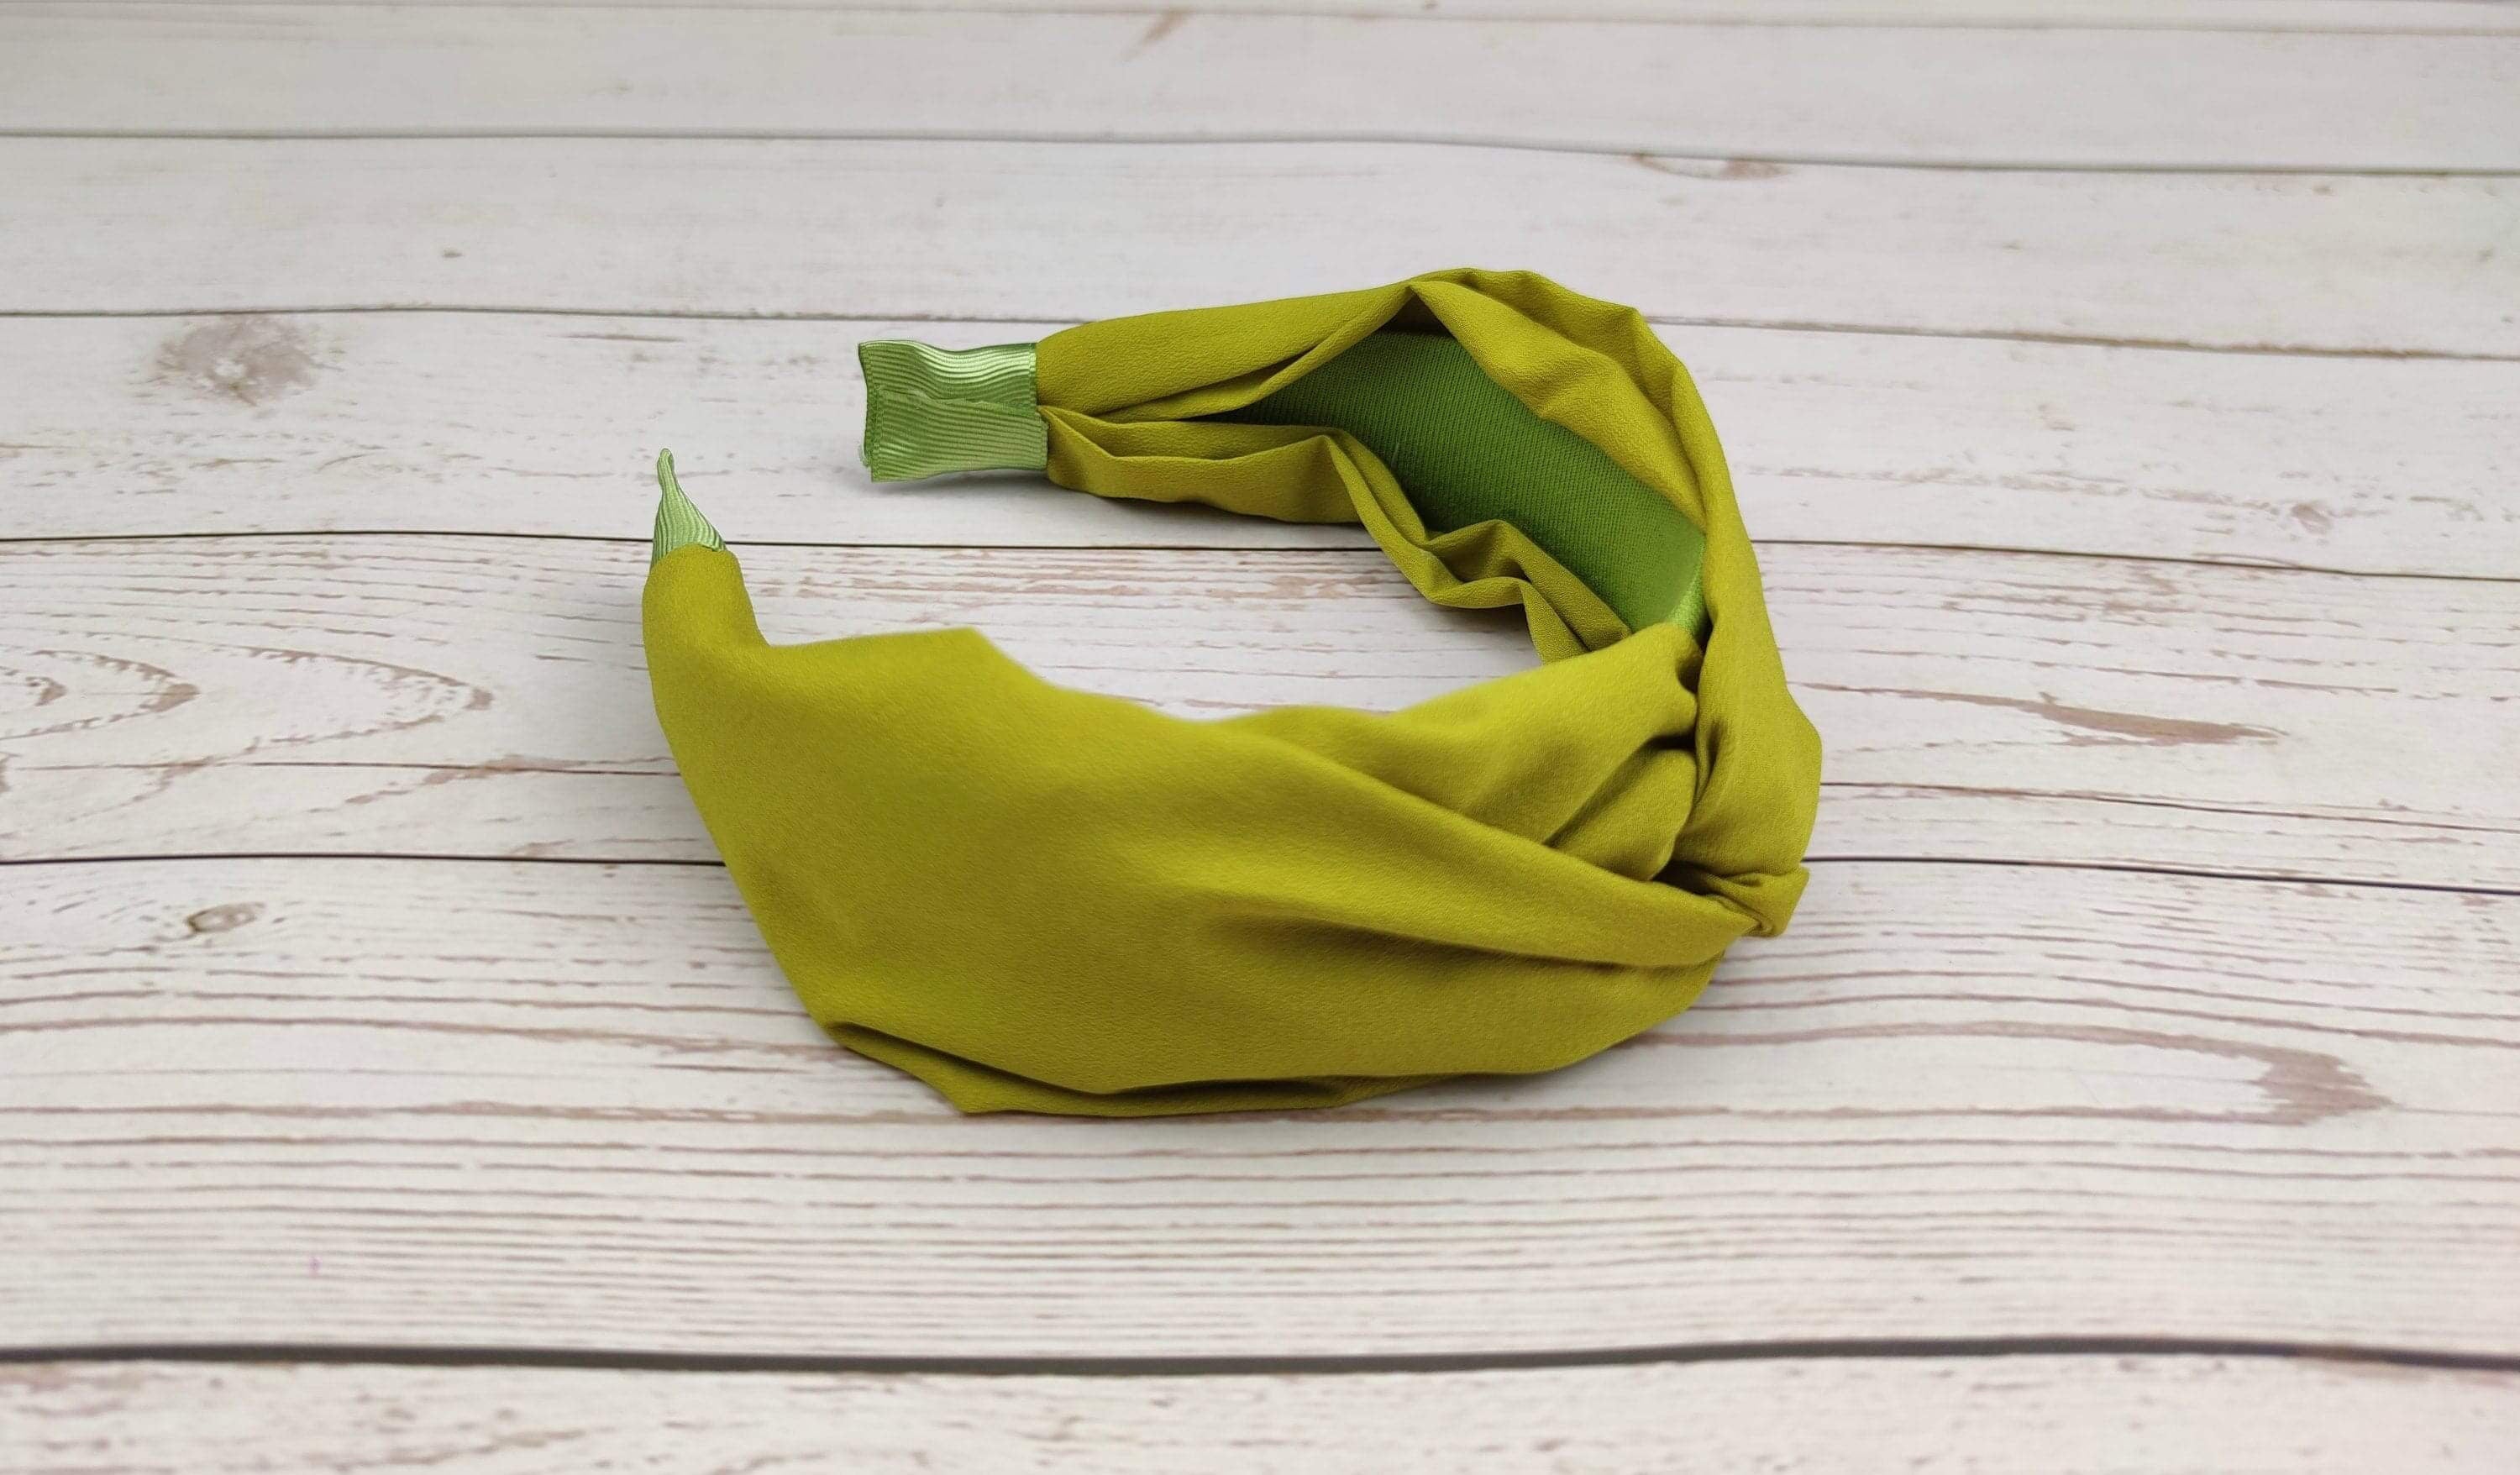 Looking for a stylish and colorful headband to wear during summer? Look no further than the Pistachio Green KNOTTED HEADBAND. Made from lightweight and durable viscose crepe, this headband is perfect for a summer day out.